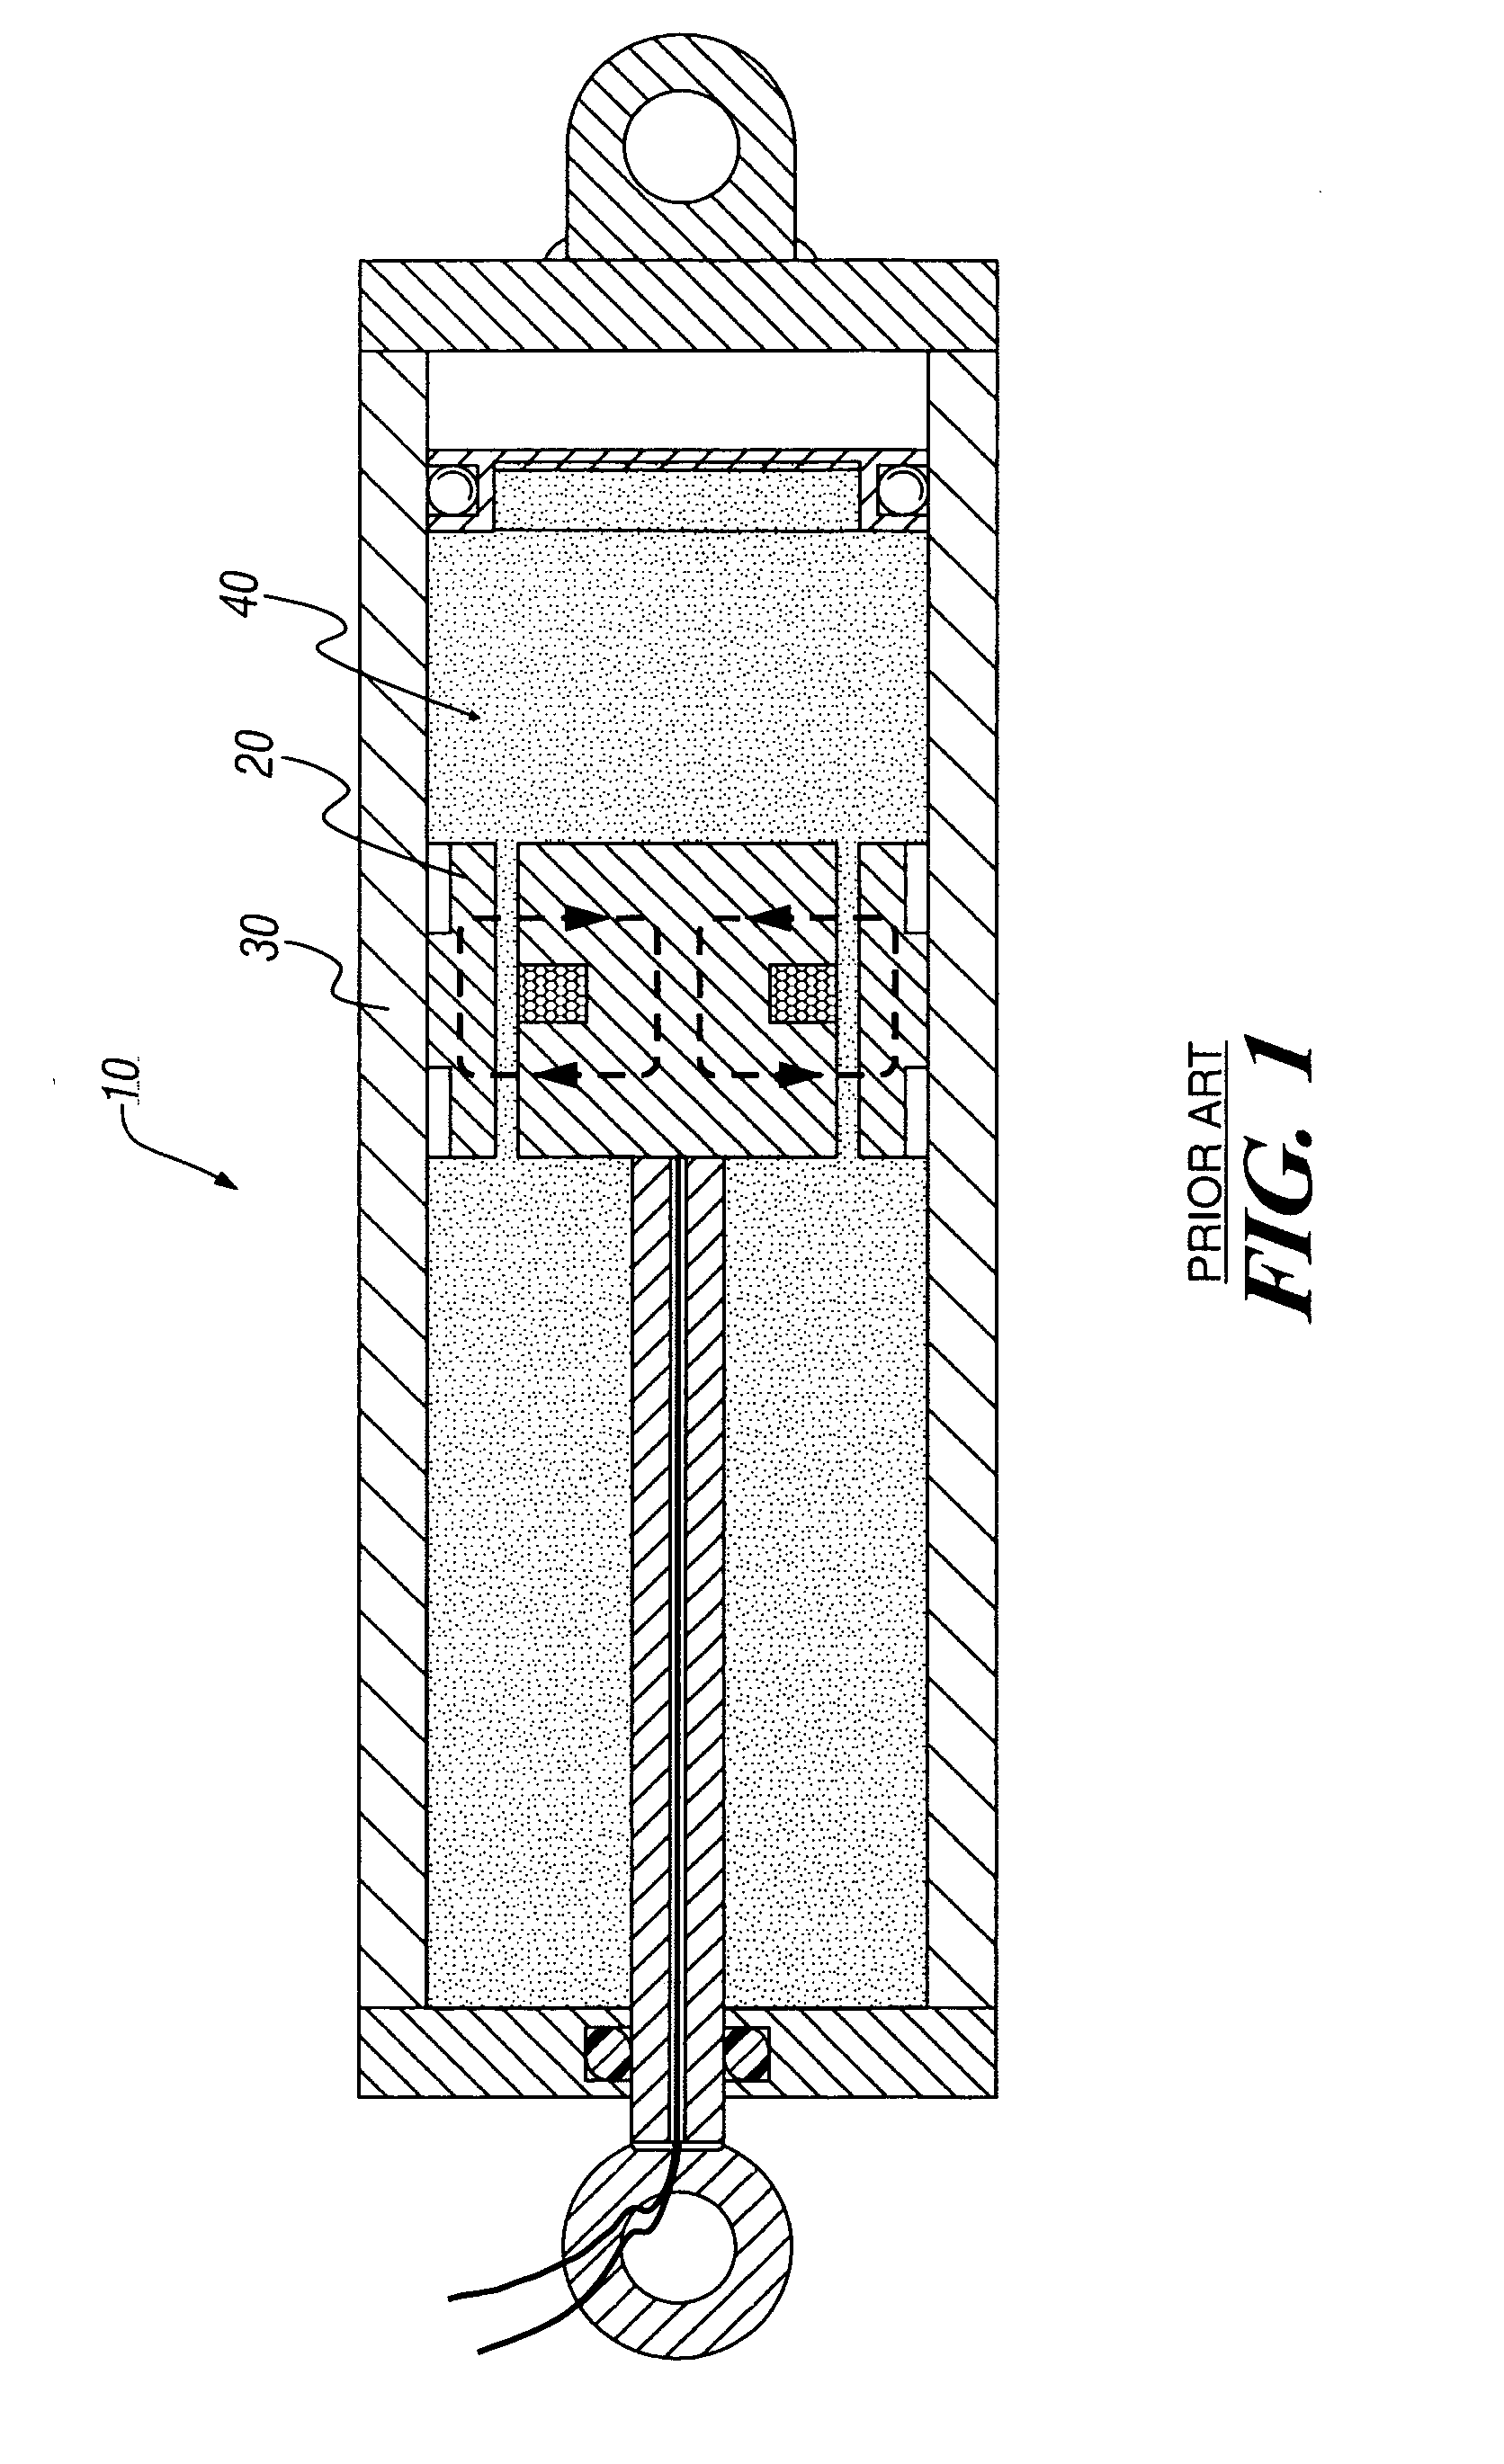 Fluid damper having continuously variable damping response